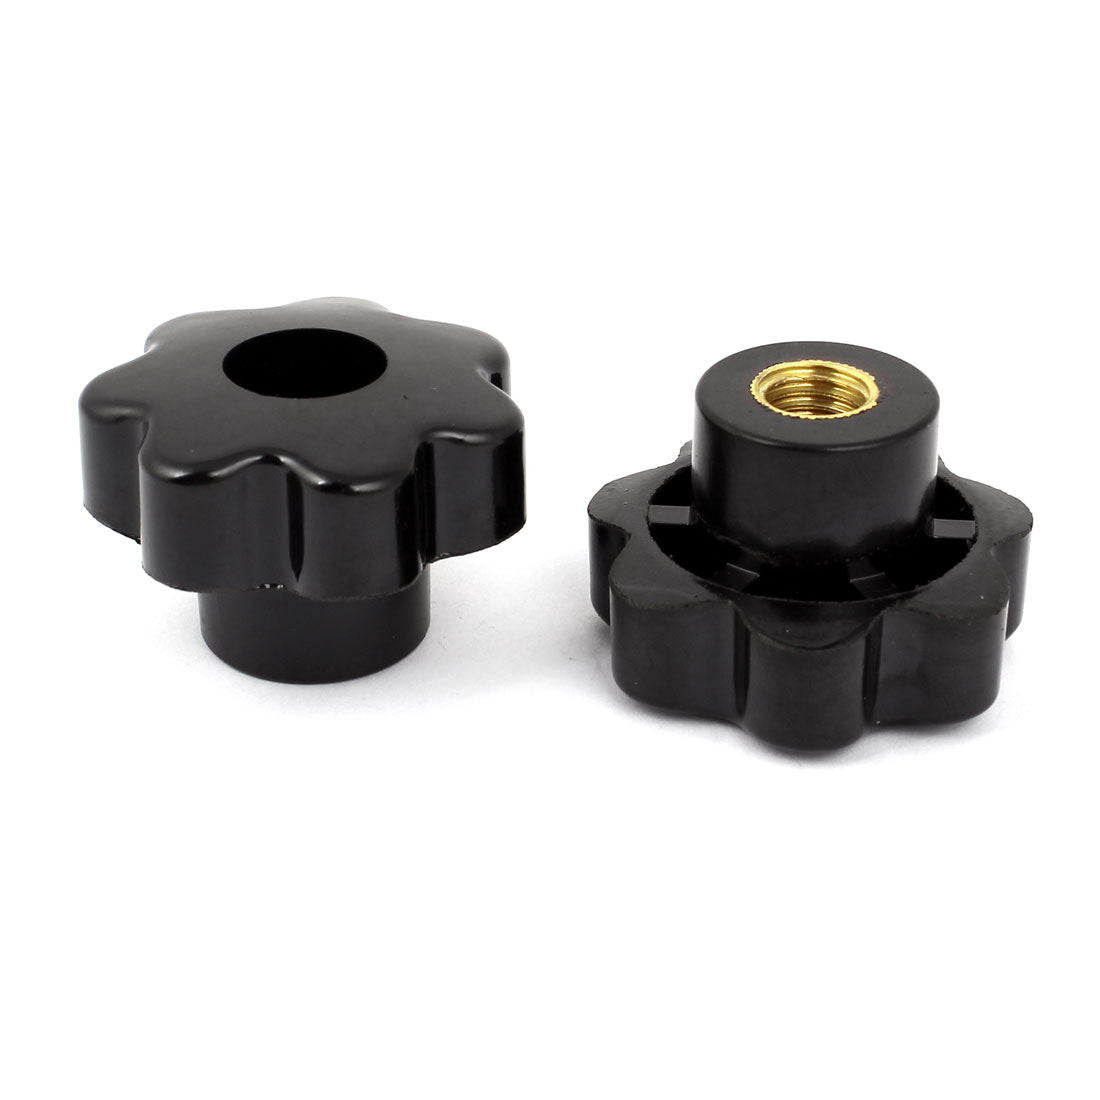 uxcell Uxcell Black Replacement M12 x 50mm Female Threaded Knurled Clamping Knob 2 Pcs